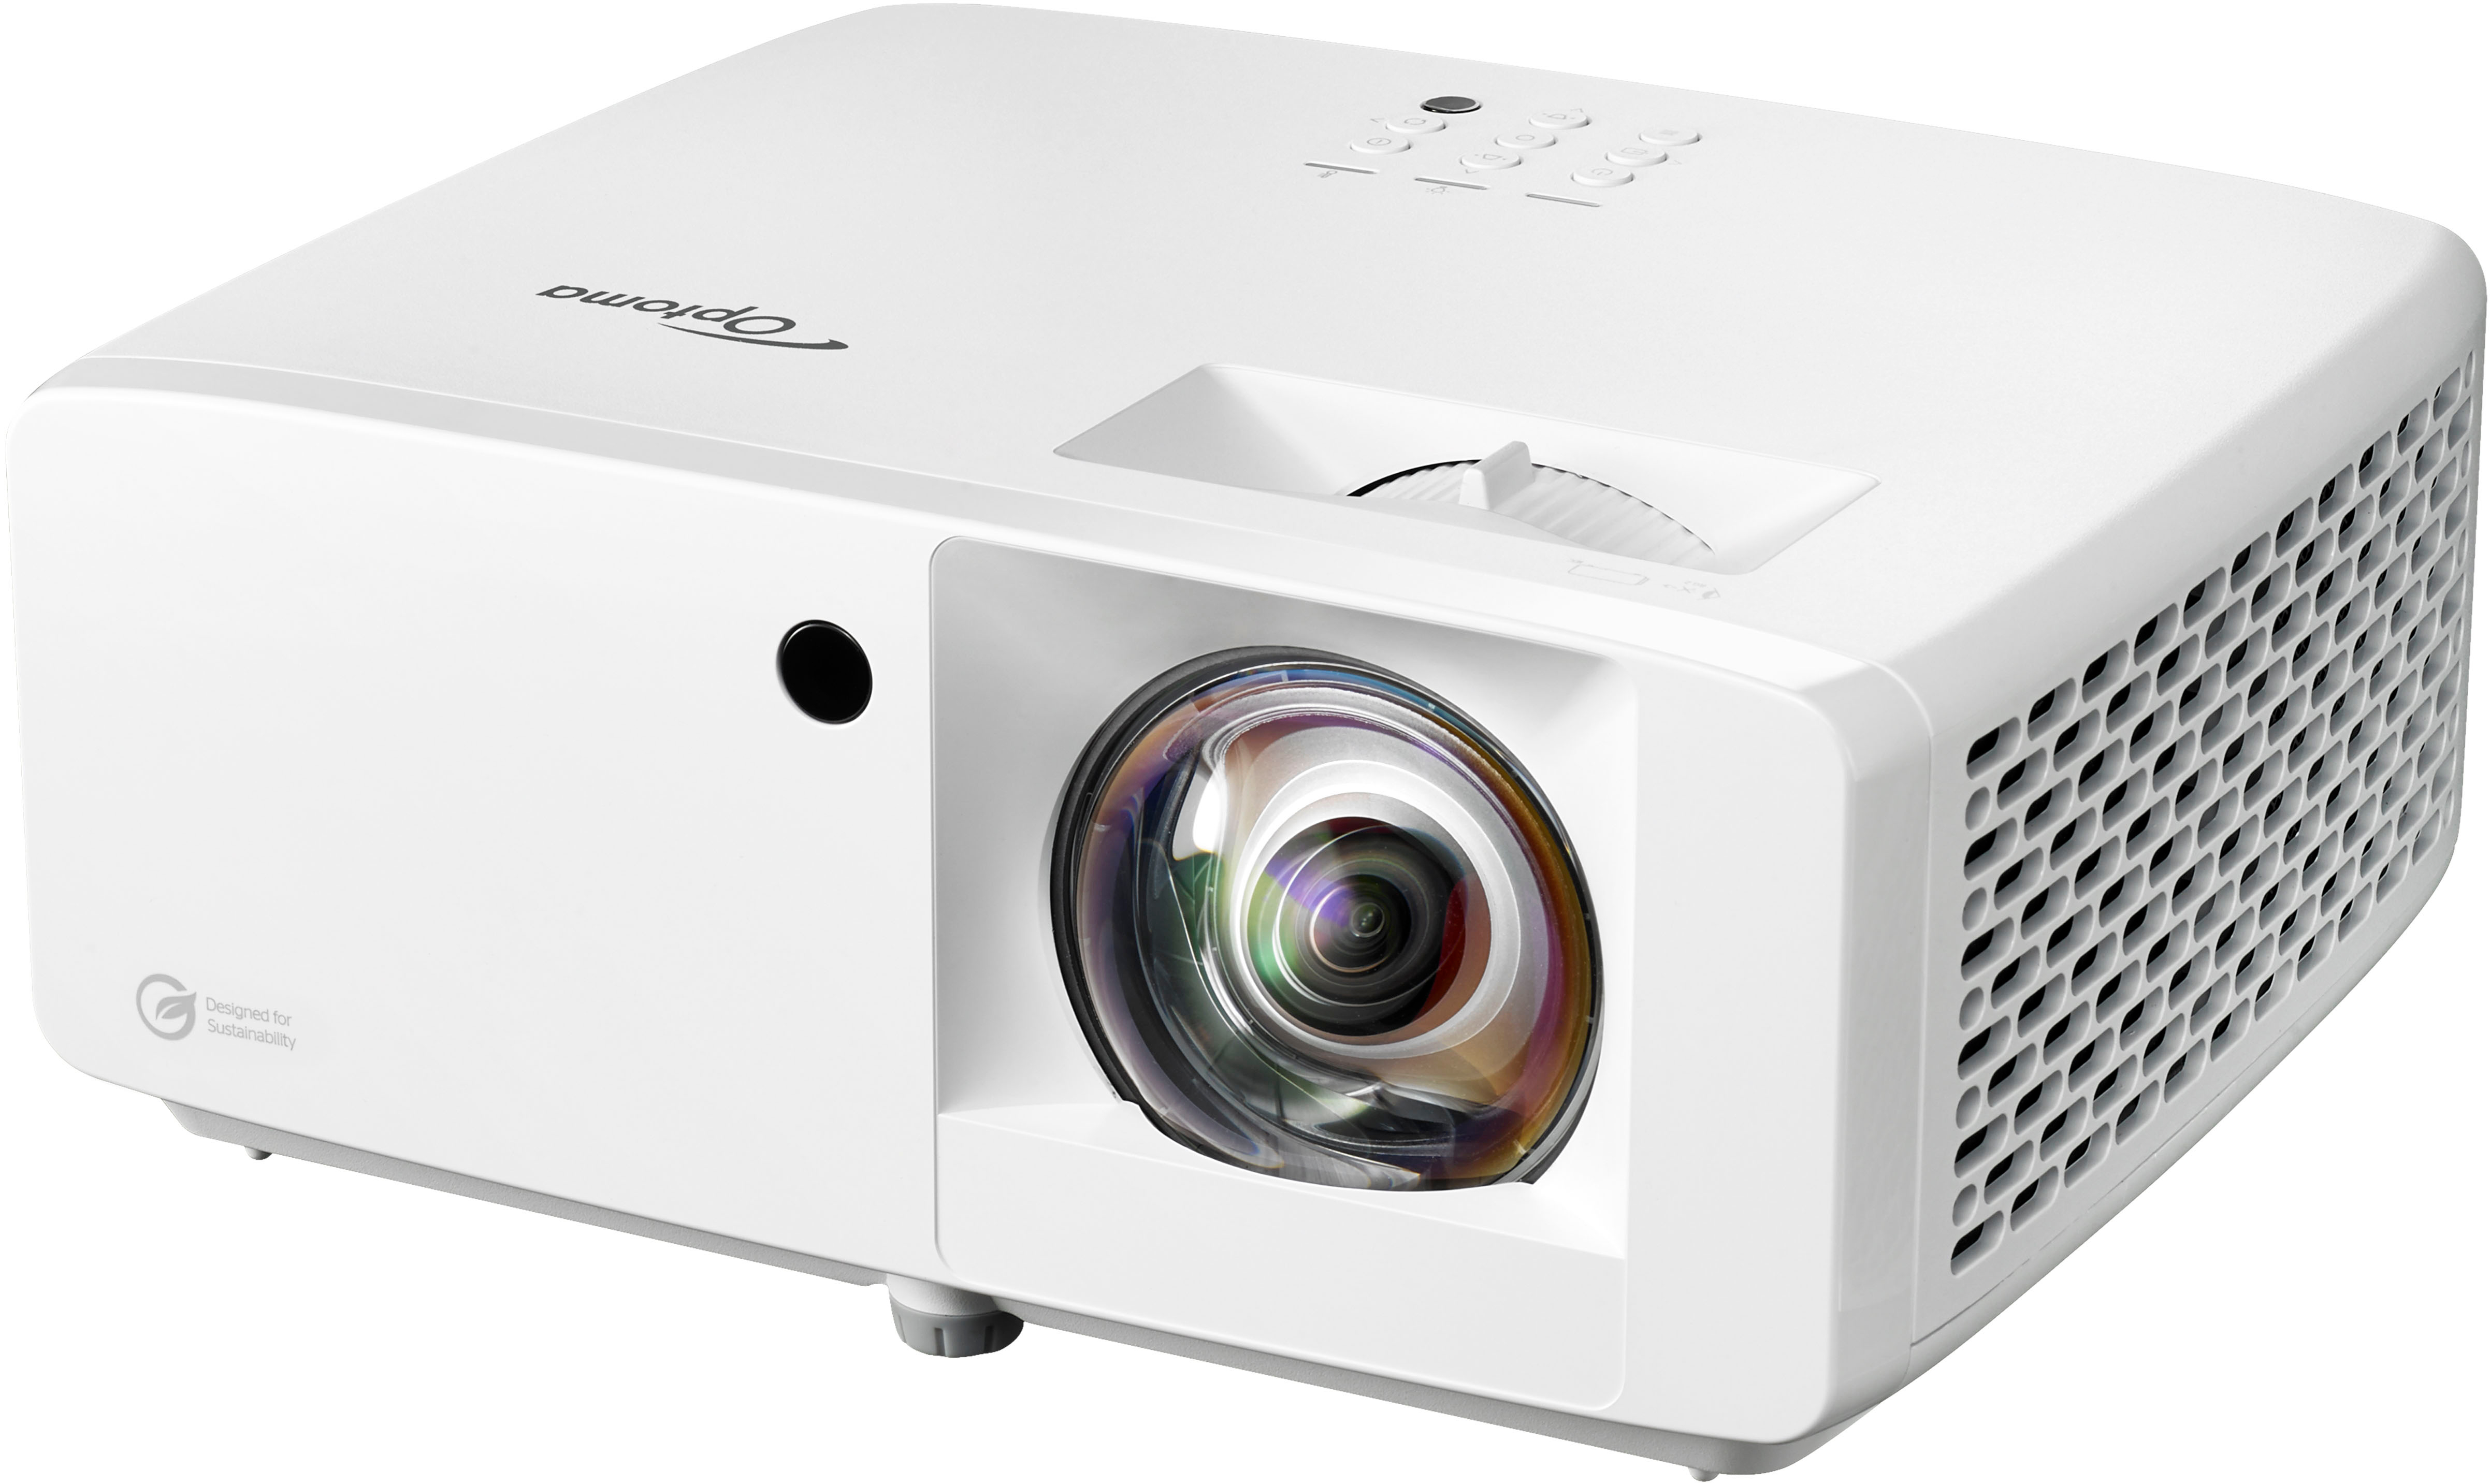 Angle View: Optoma - GT2100HDR Compact Short Throw 1080p HD Laser Projector with High Dynamic Range - White